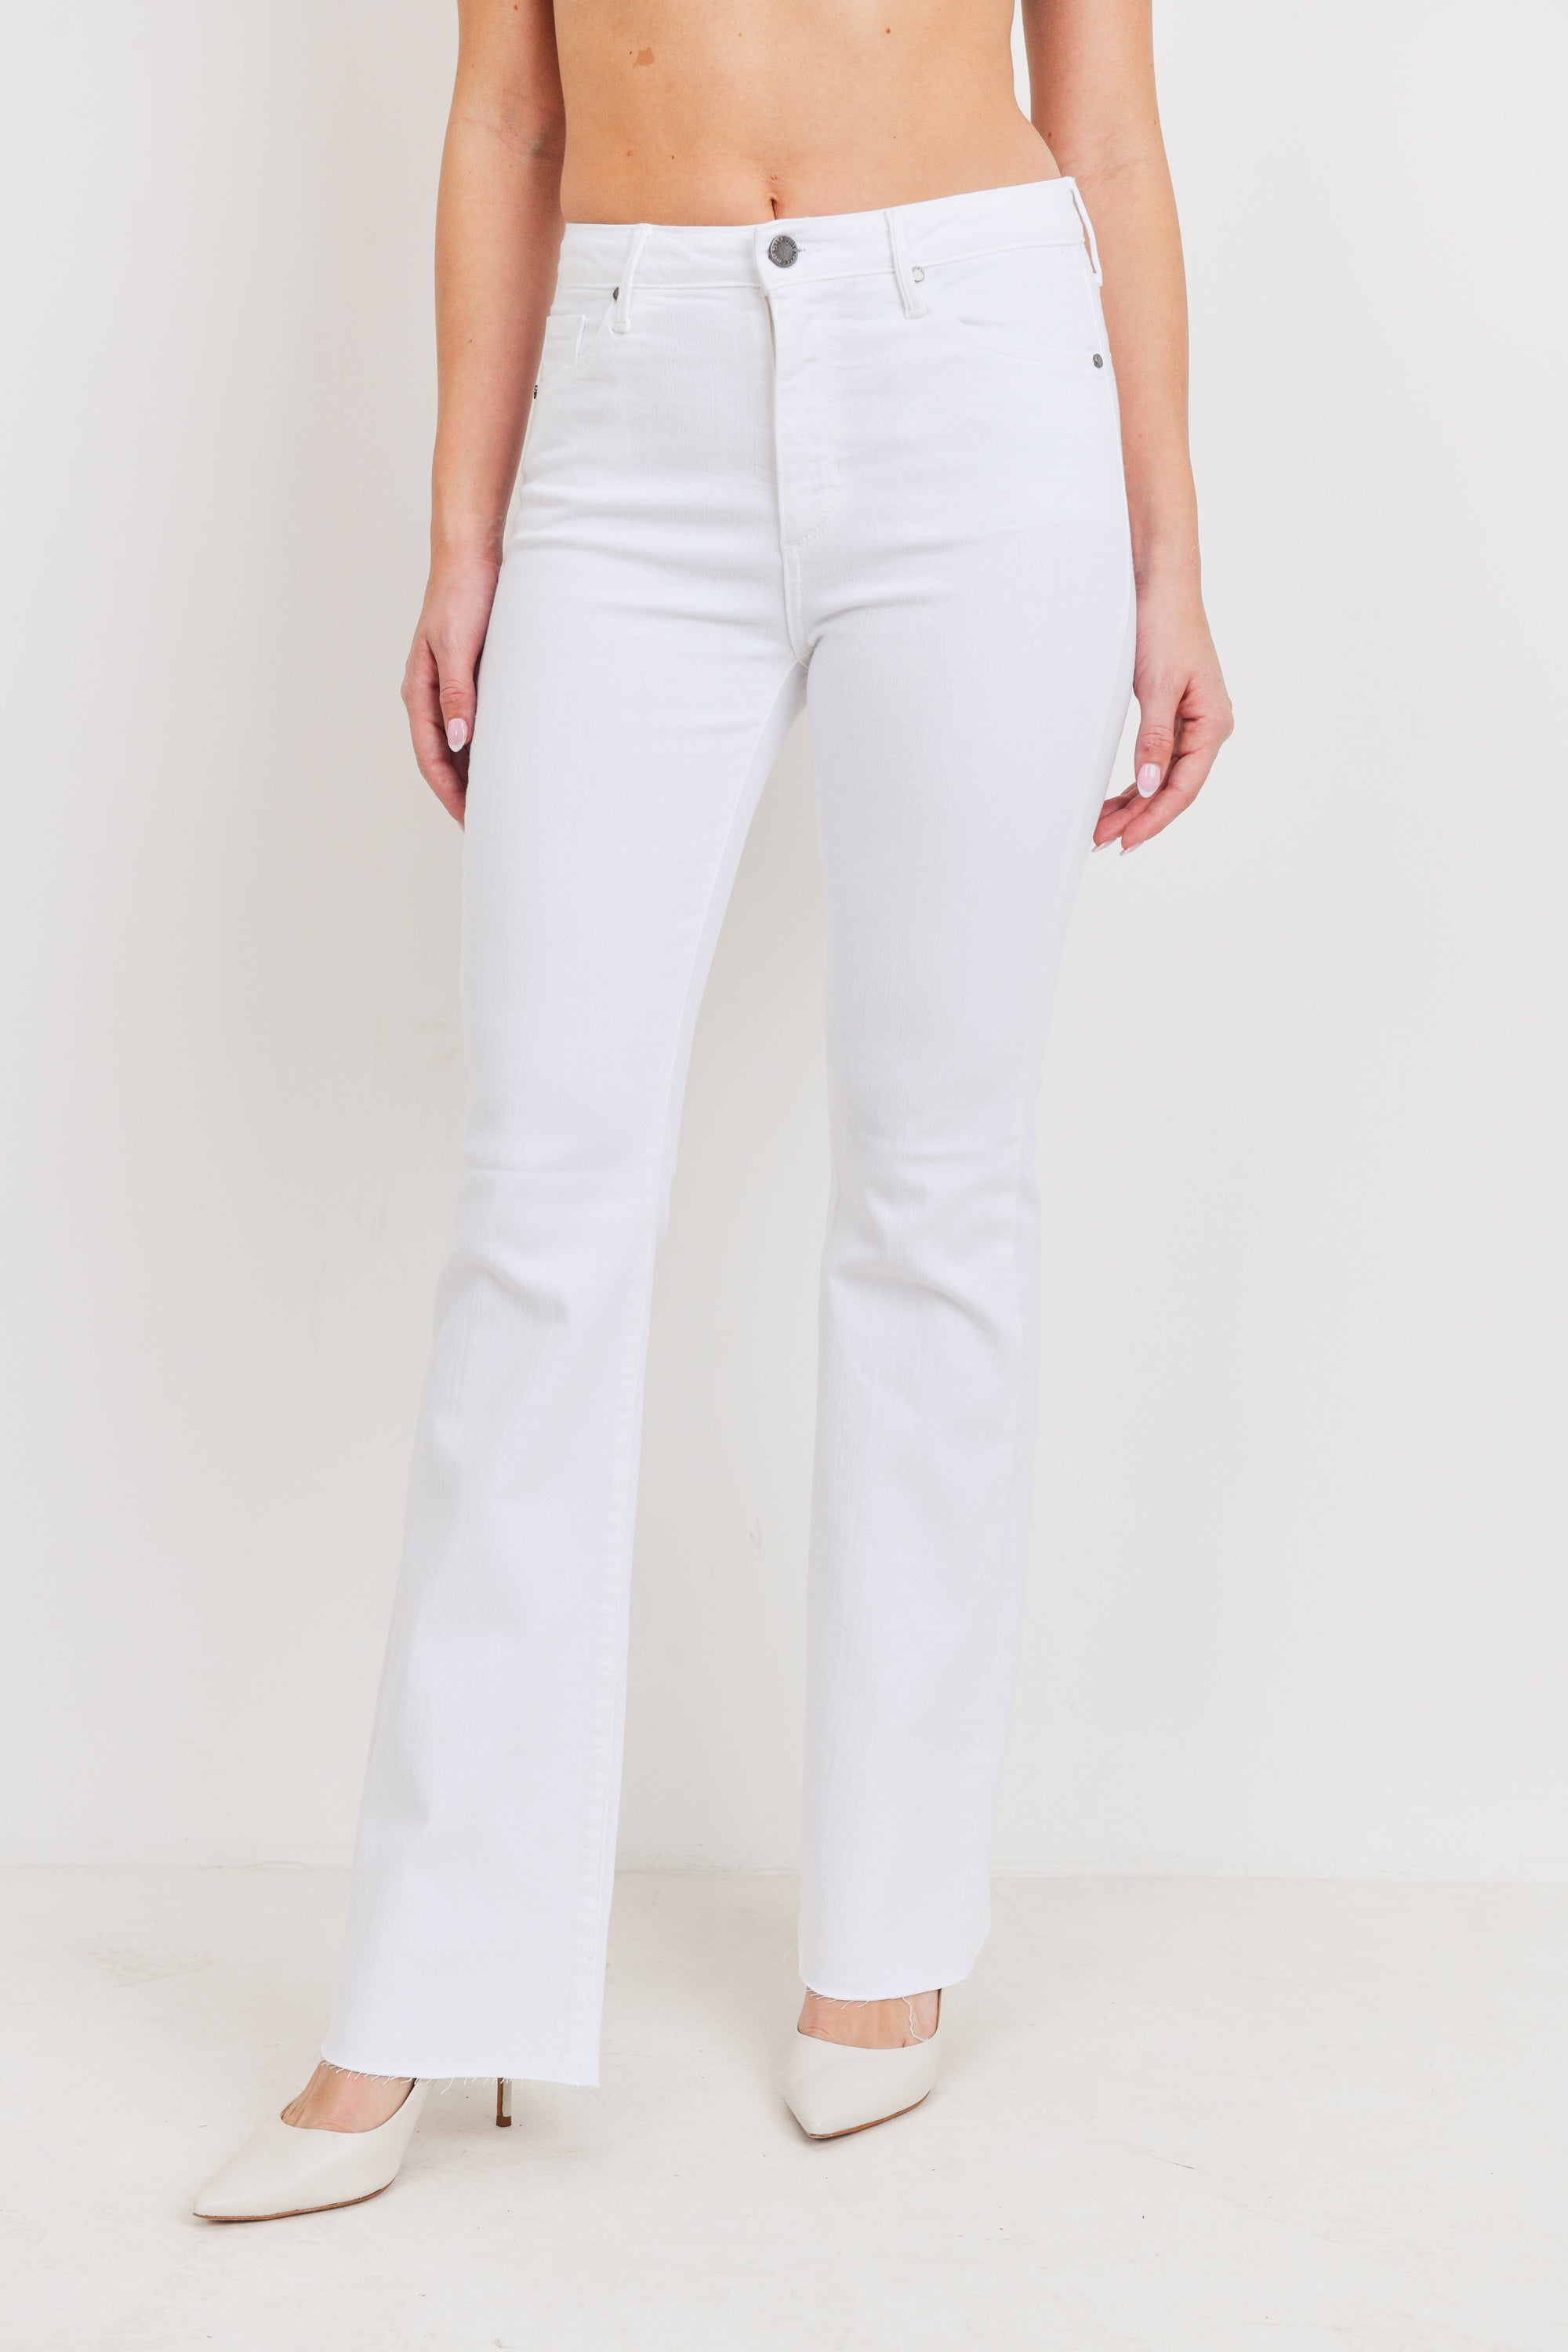 The Flare Jean in White